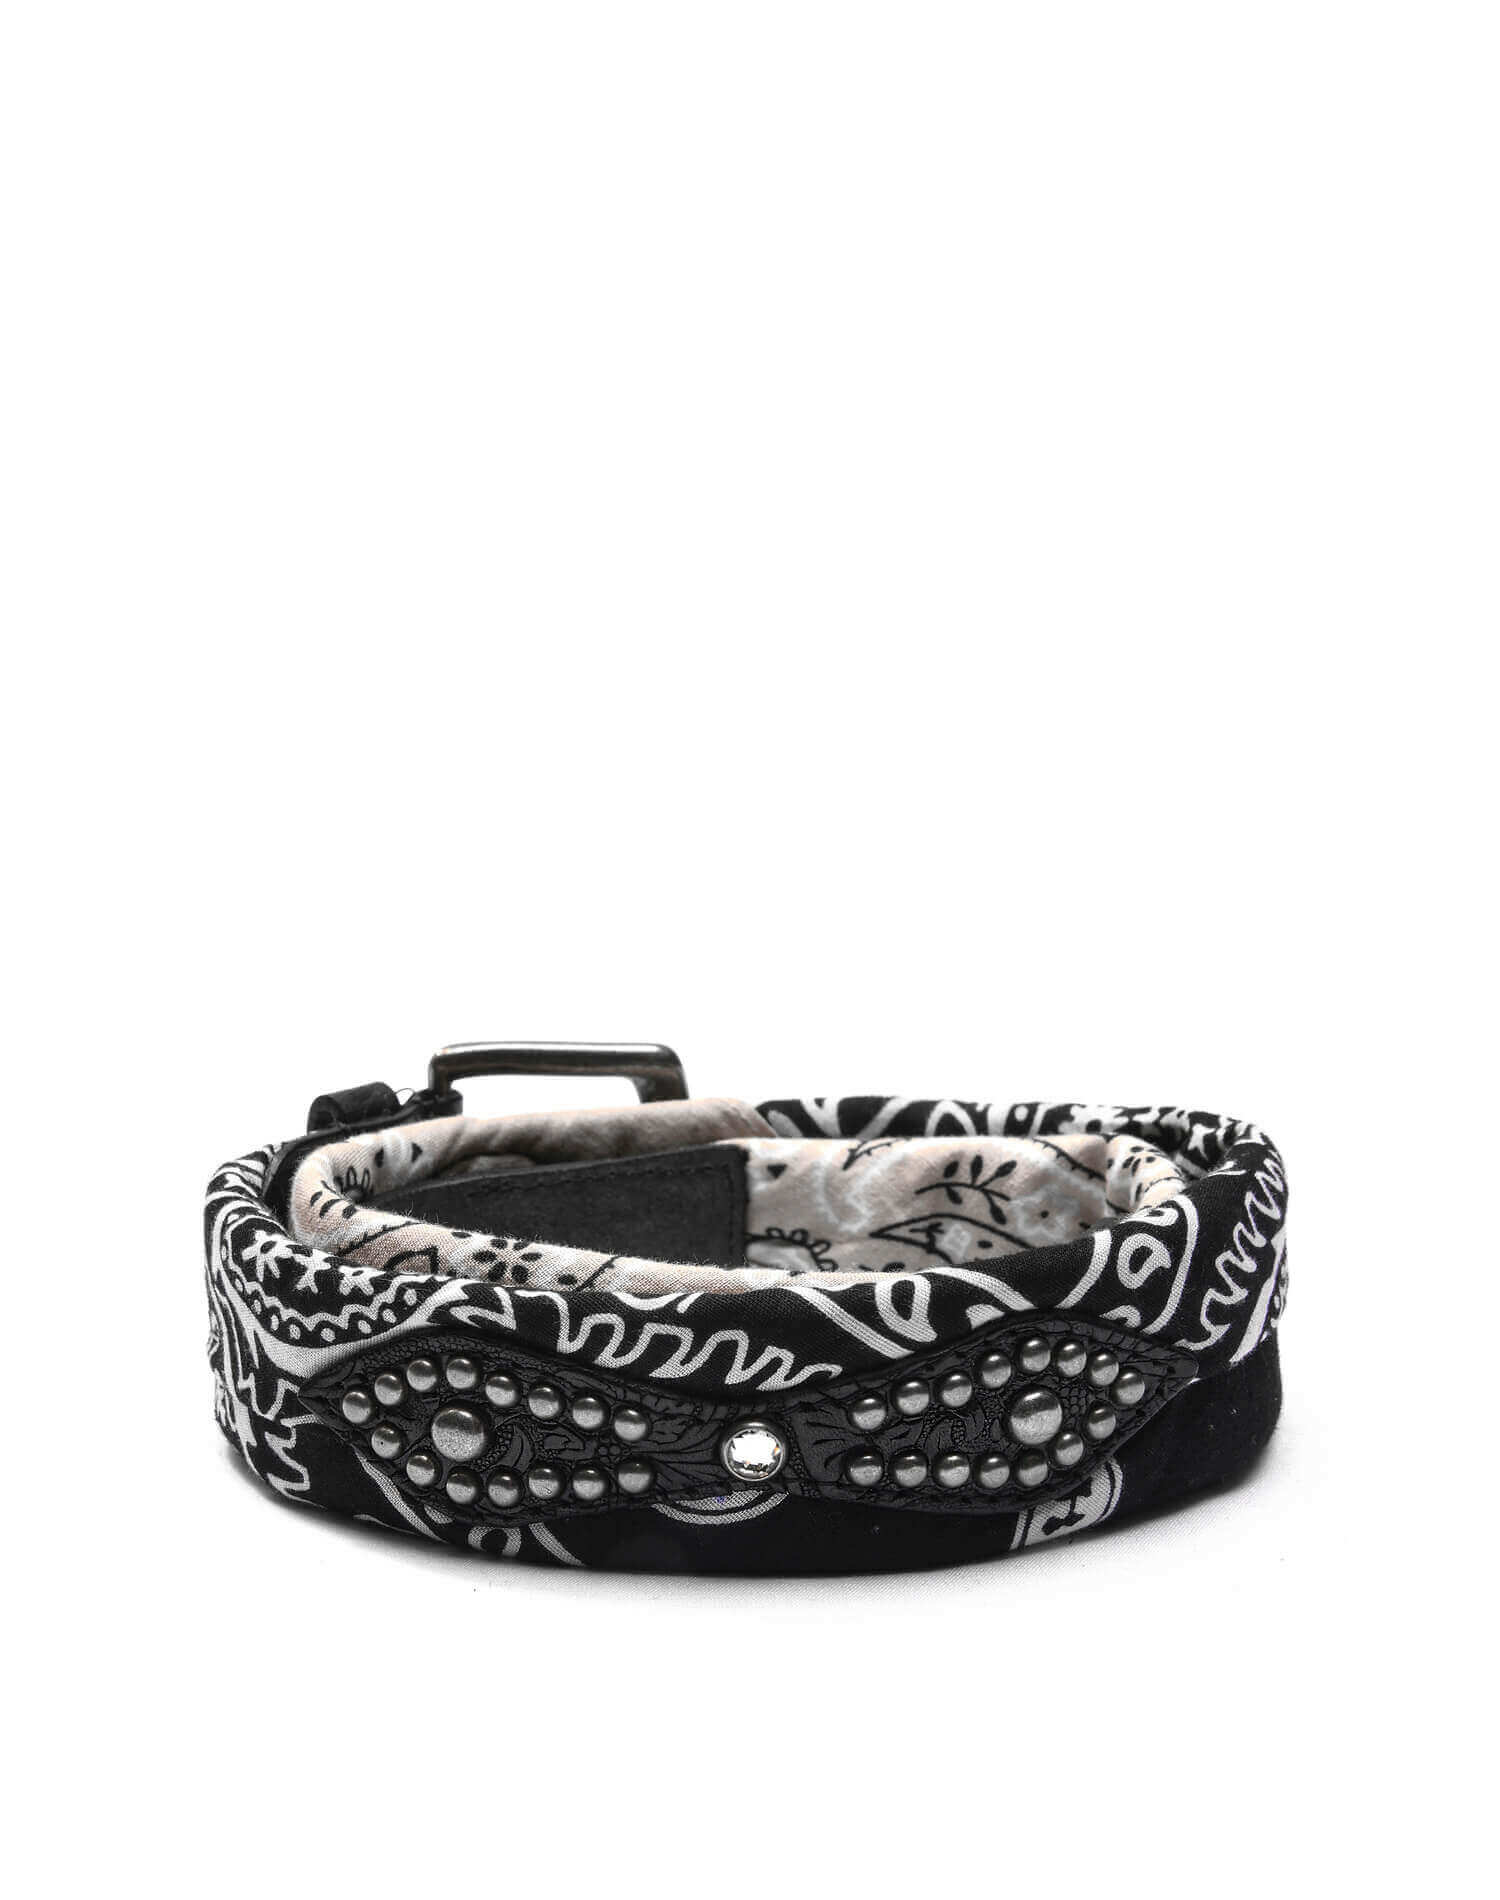 BANDANA BELT Black carved leather belt, paisley black and beige bandanas with studs and leather details. Height: 3,5 cm. Made in Italy. HTC LOS ANGELES